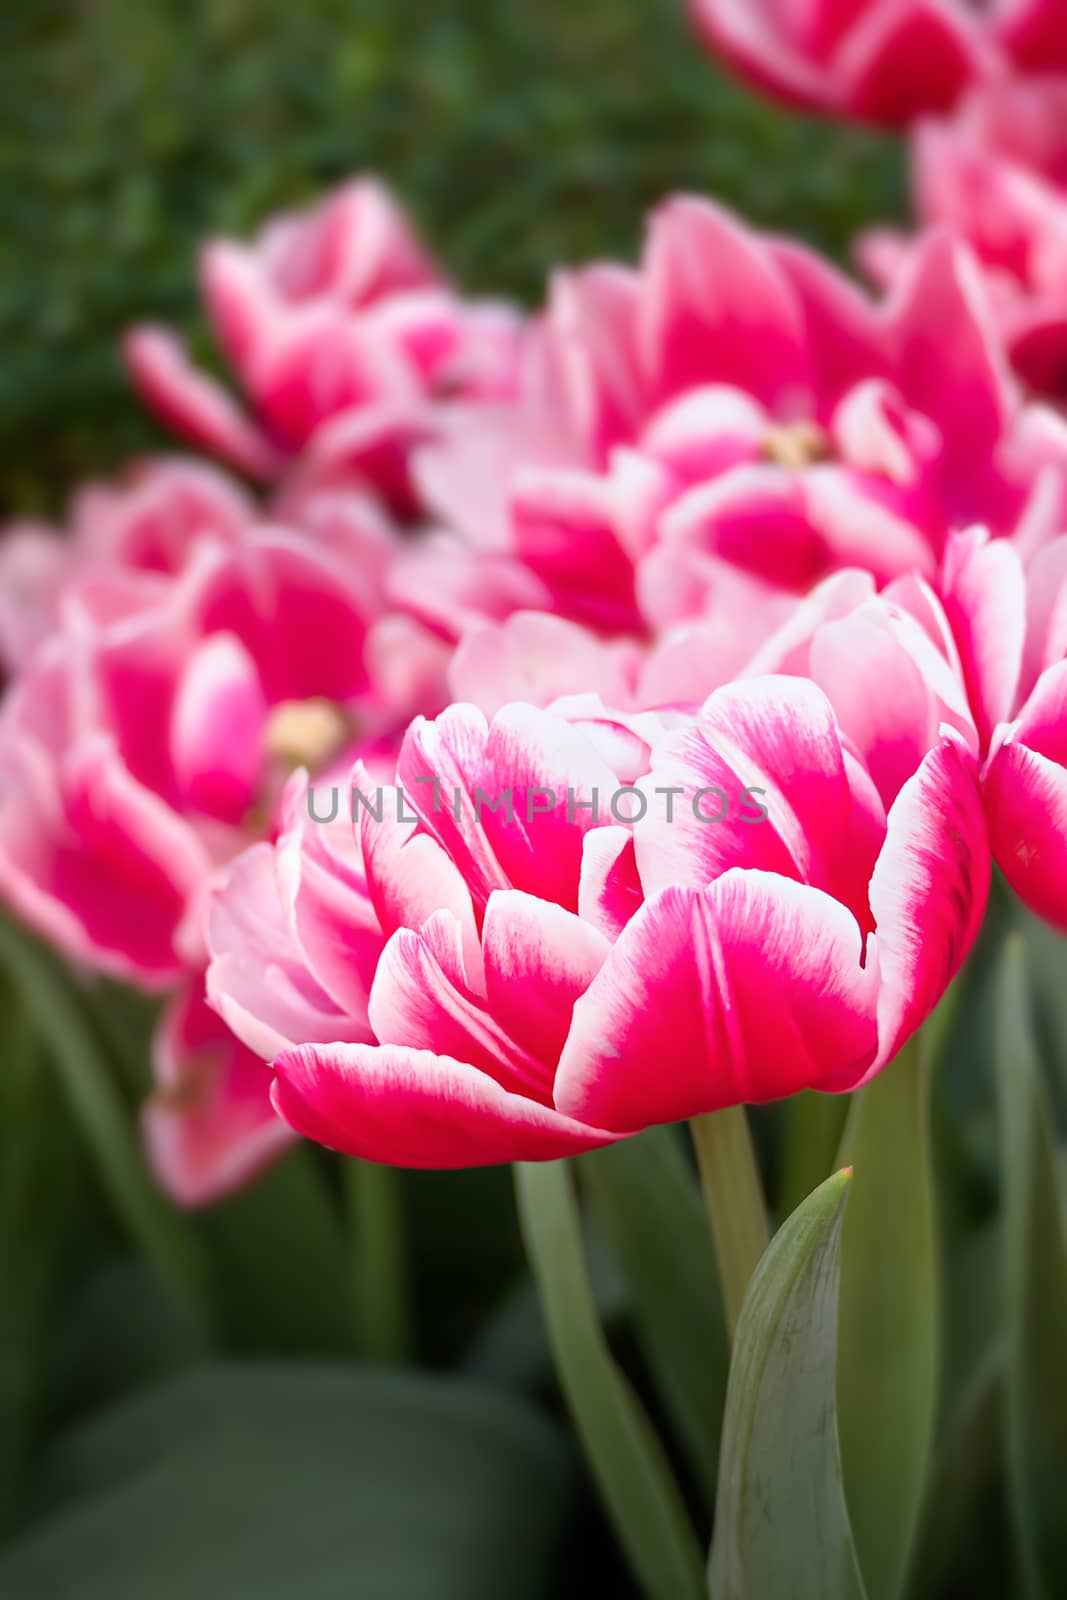 Beautiful pink tulips flower with green leaves grown in garden